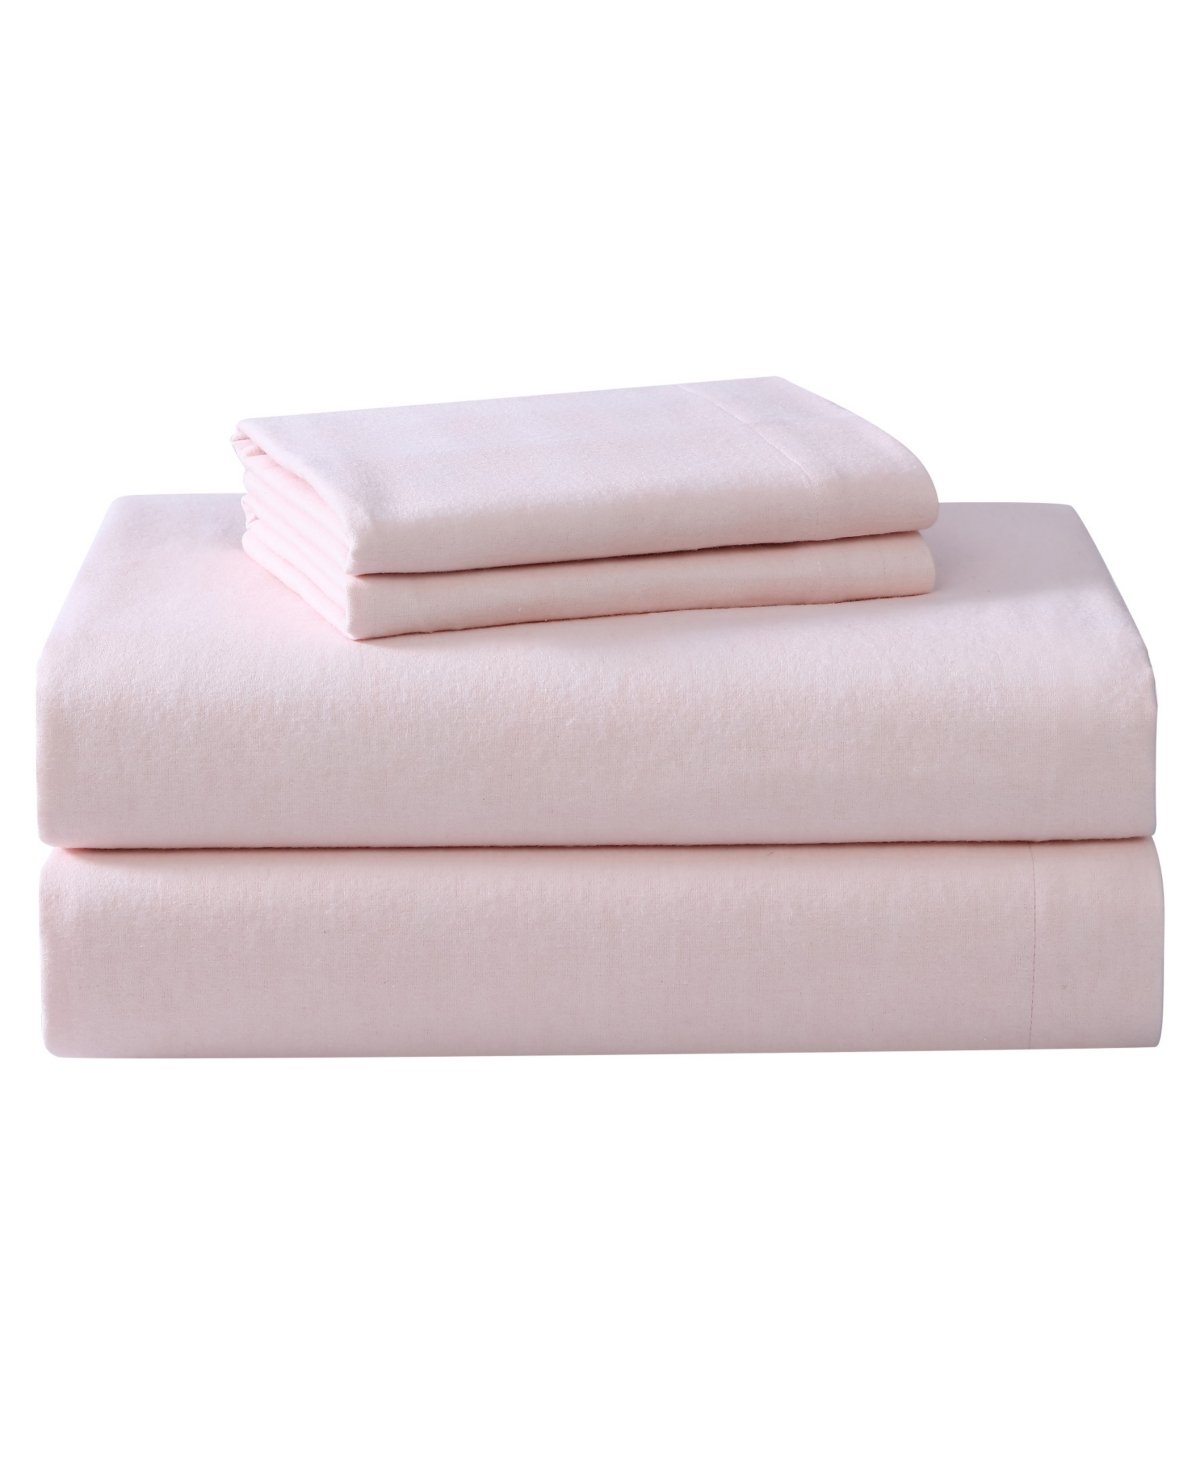 Laura Ashley Solid Cotton Flannel 4 Piece Sheet Set, King In Bright Blush